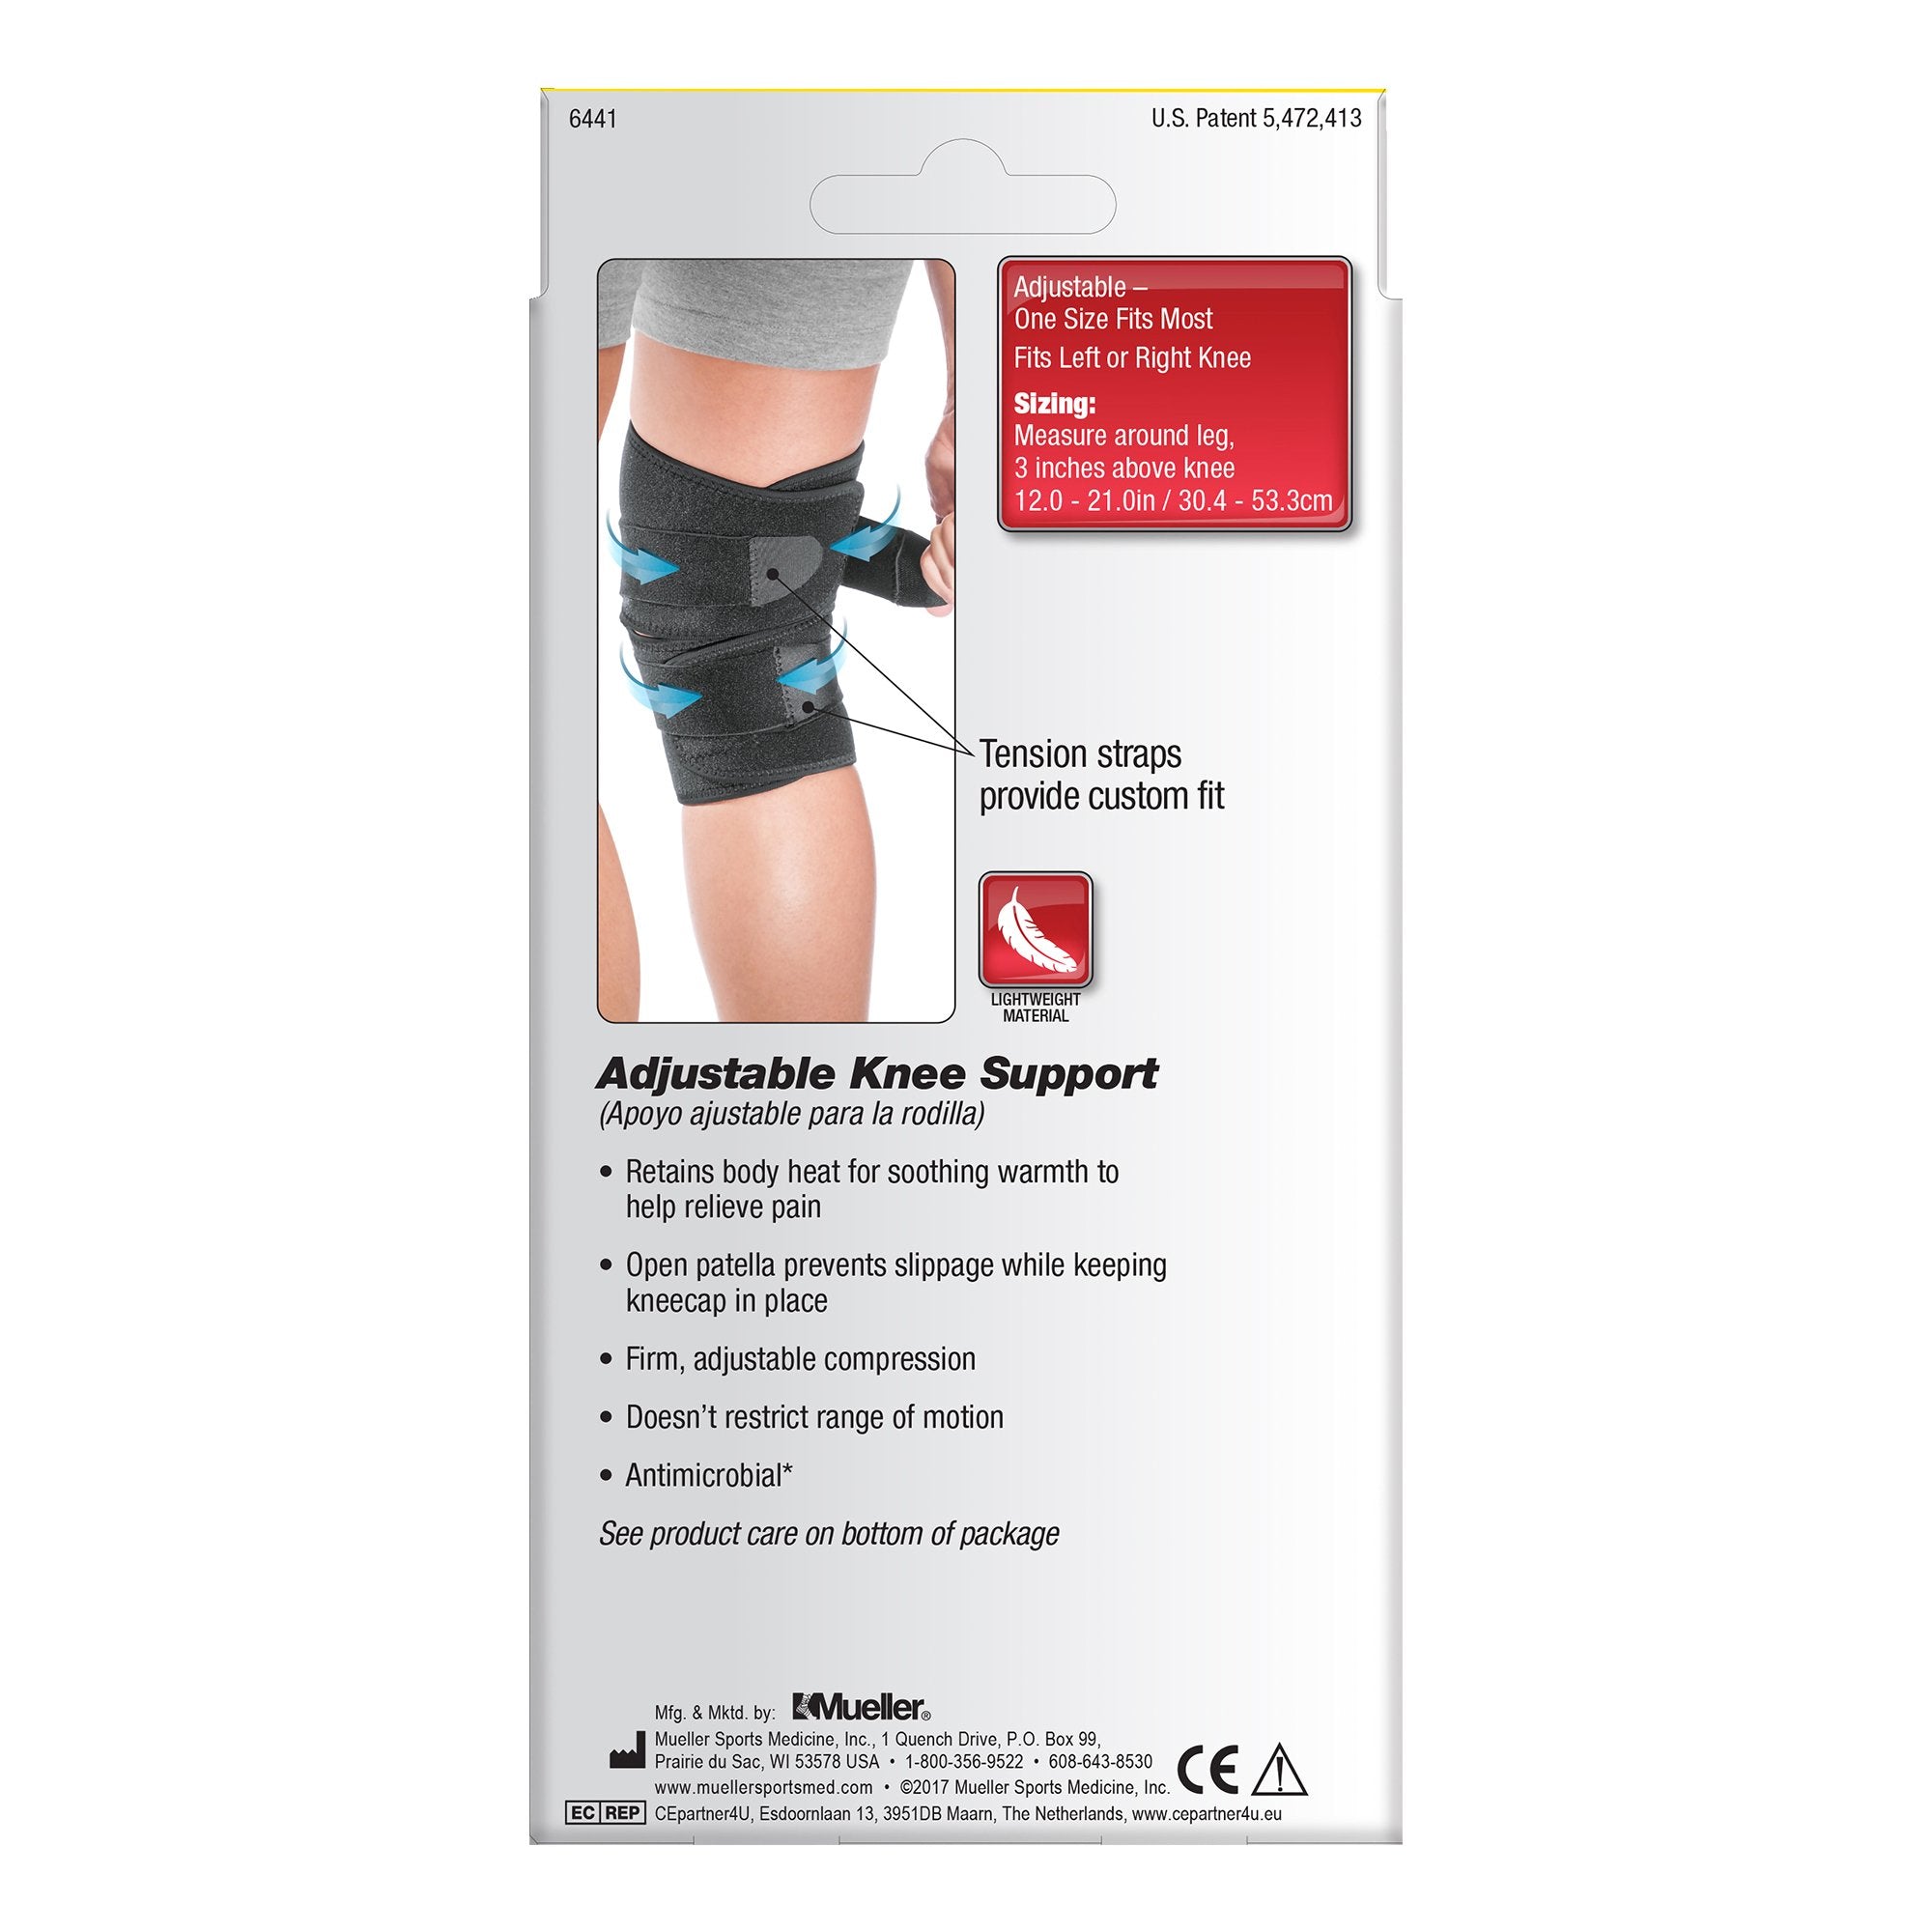 Knee Support Mueller Sport Care One Size Fits Most Hook and Loop Strap Closure 12 to 21 Inch Above Knee Circumference Left or Right Knee